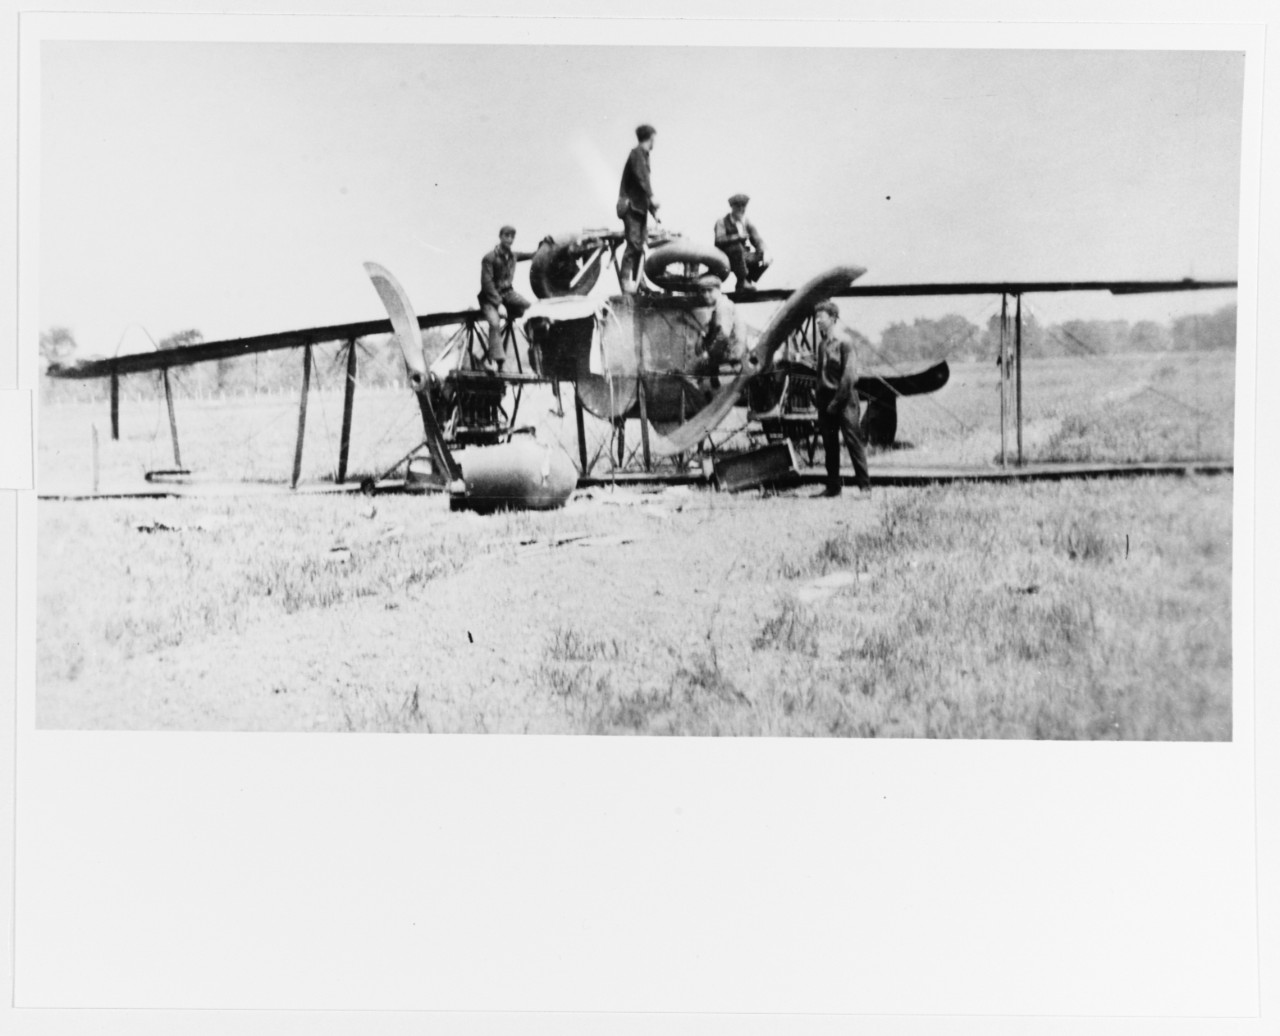 Wreck of a twin-engine airplane